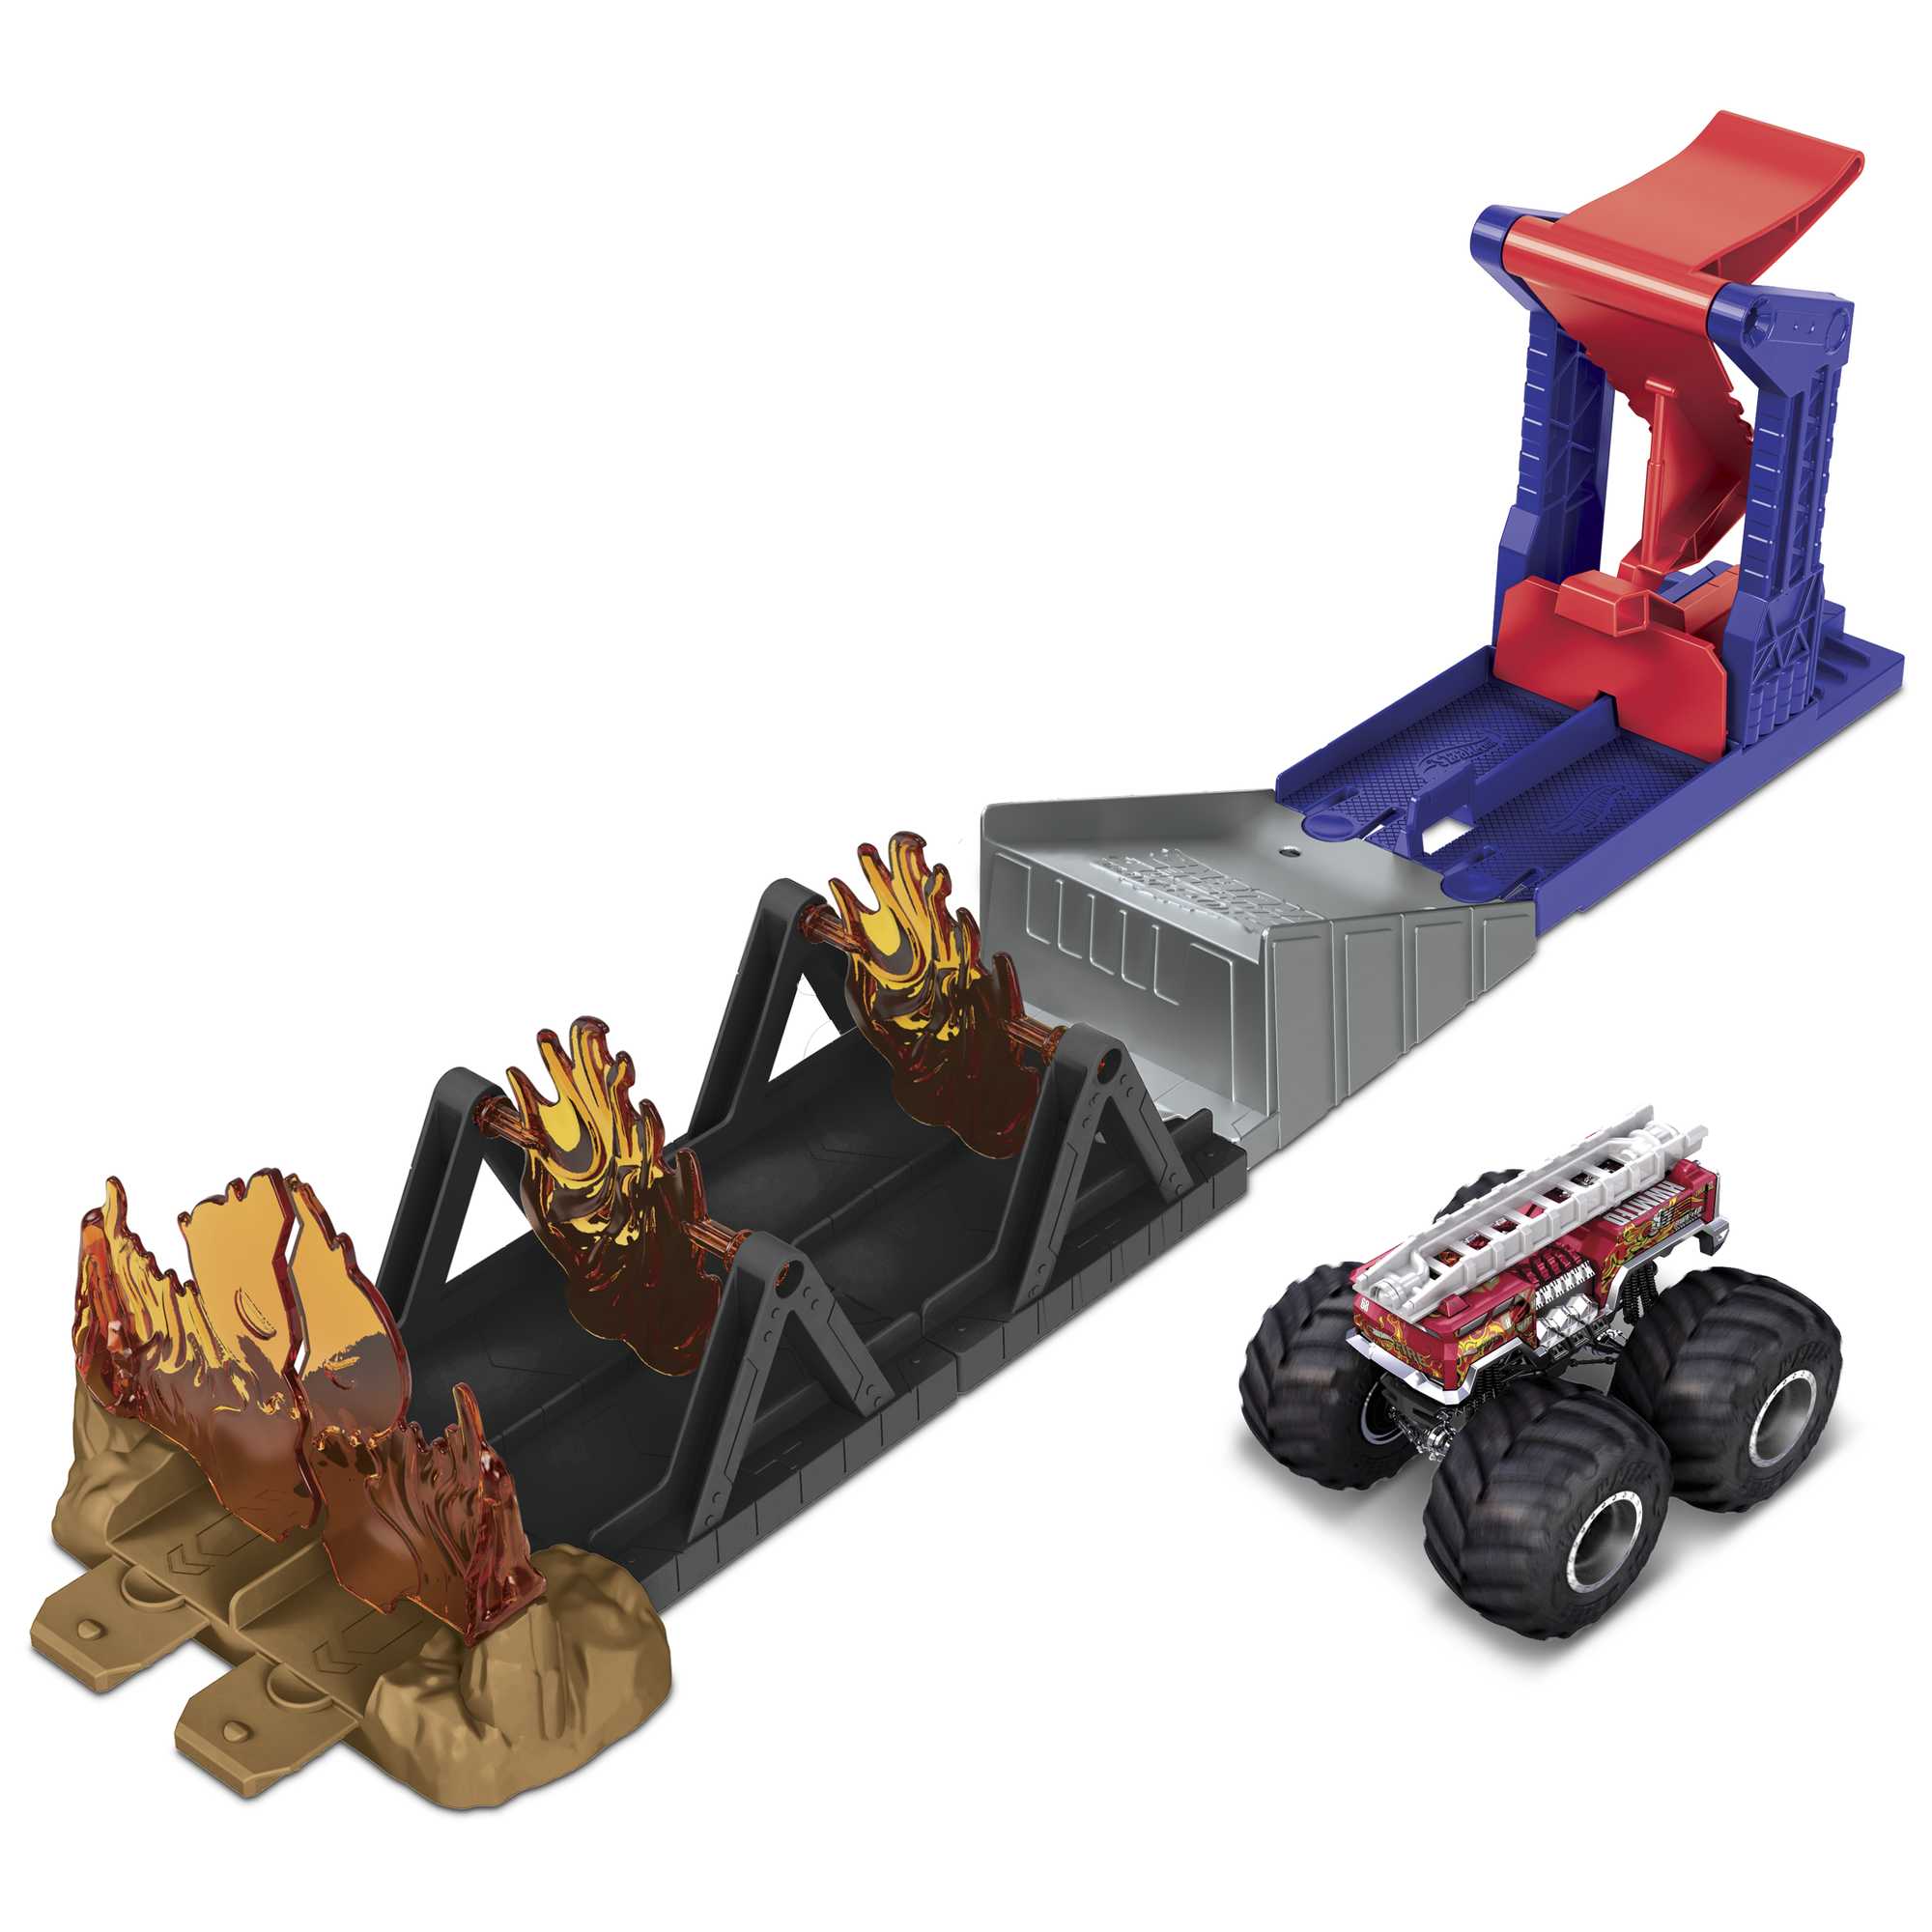  Hot Wheels Monster Truck Epic Loop Challenge Play Set with Truck  and car : Toys & Games